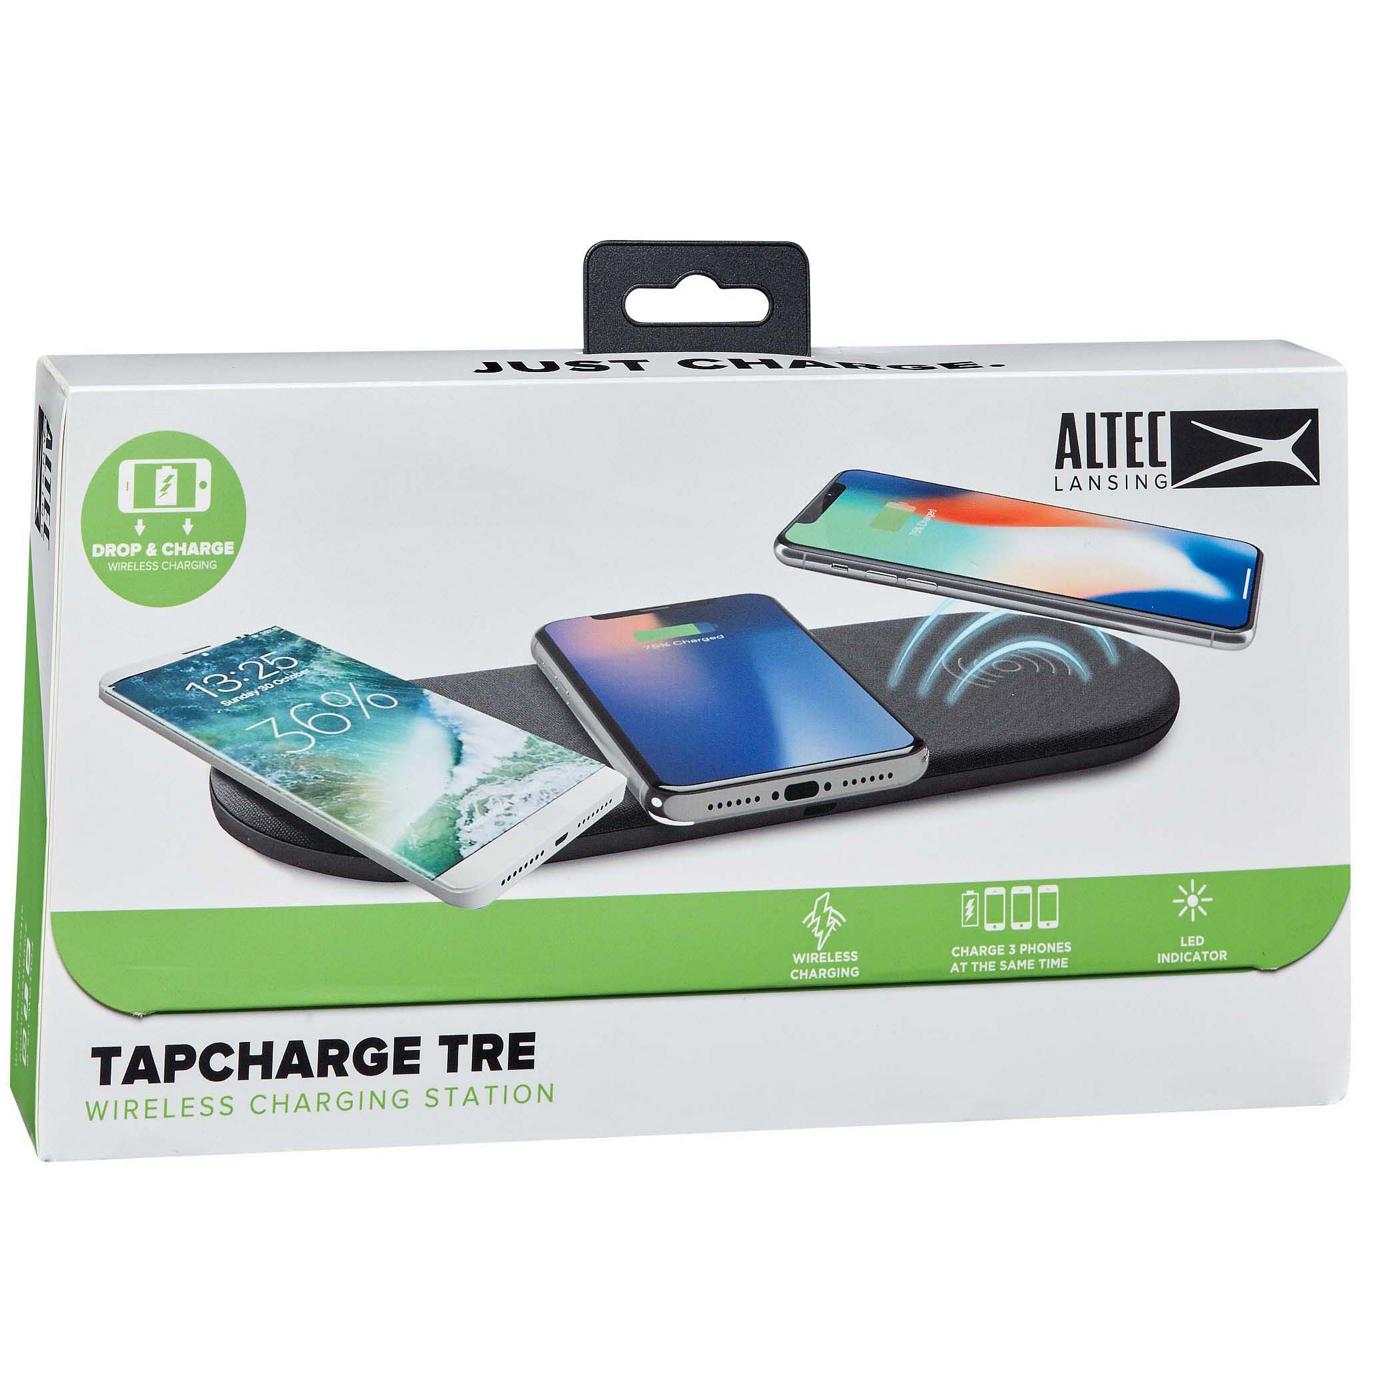 Altec Lansing Tap Charge Tre 3 Devices; image 1 of 2